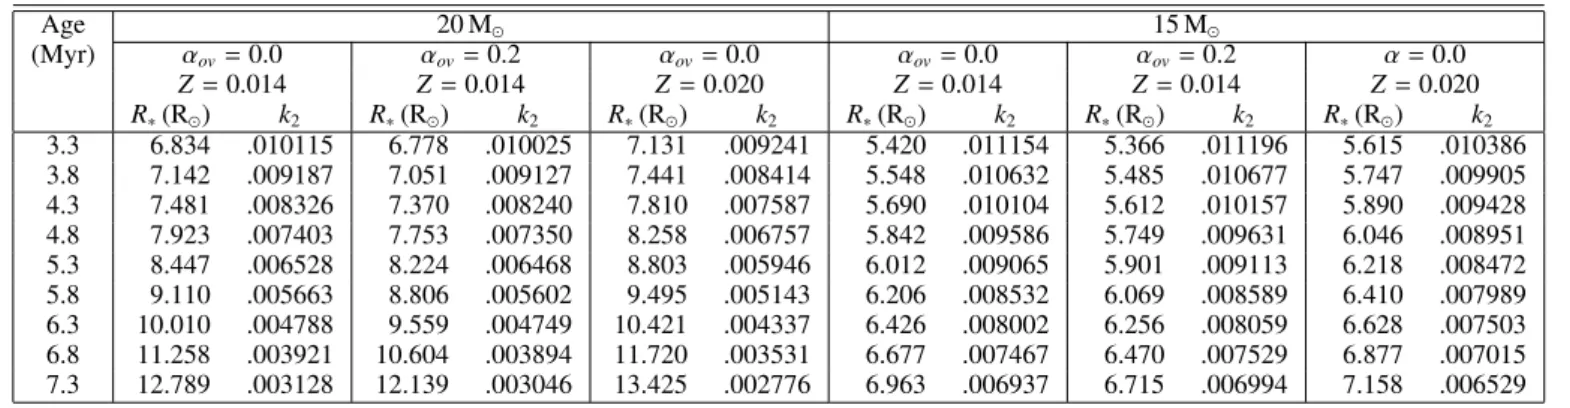 Table 4. Evolution of the internal structure constant k 2 and the radius of 15 M  and 20 M  CLES model stars as a function of age, overshooting parameter, and metallicity.